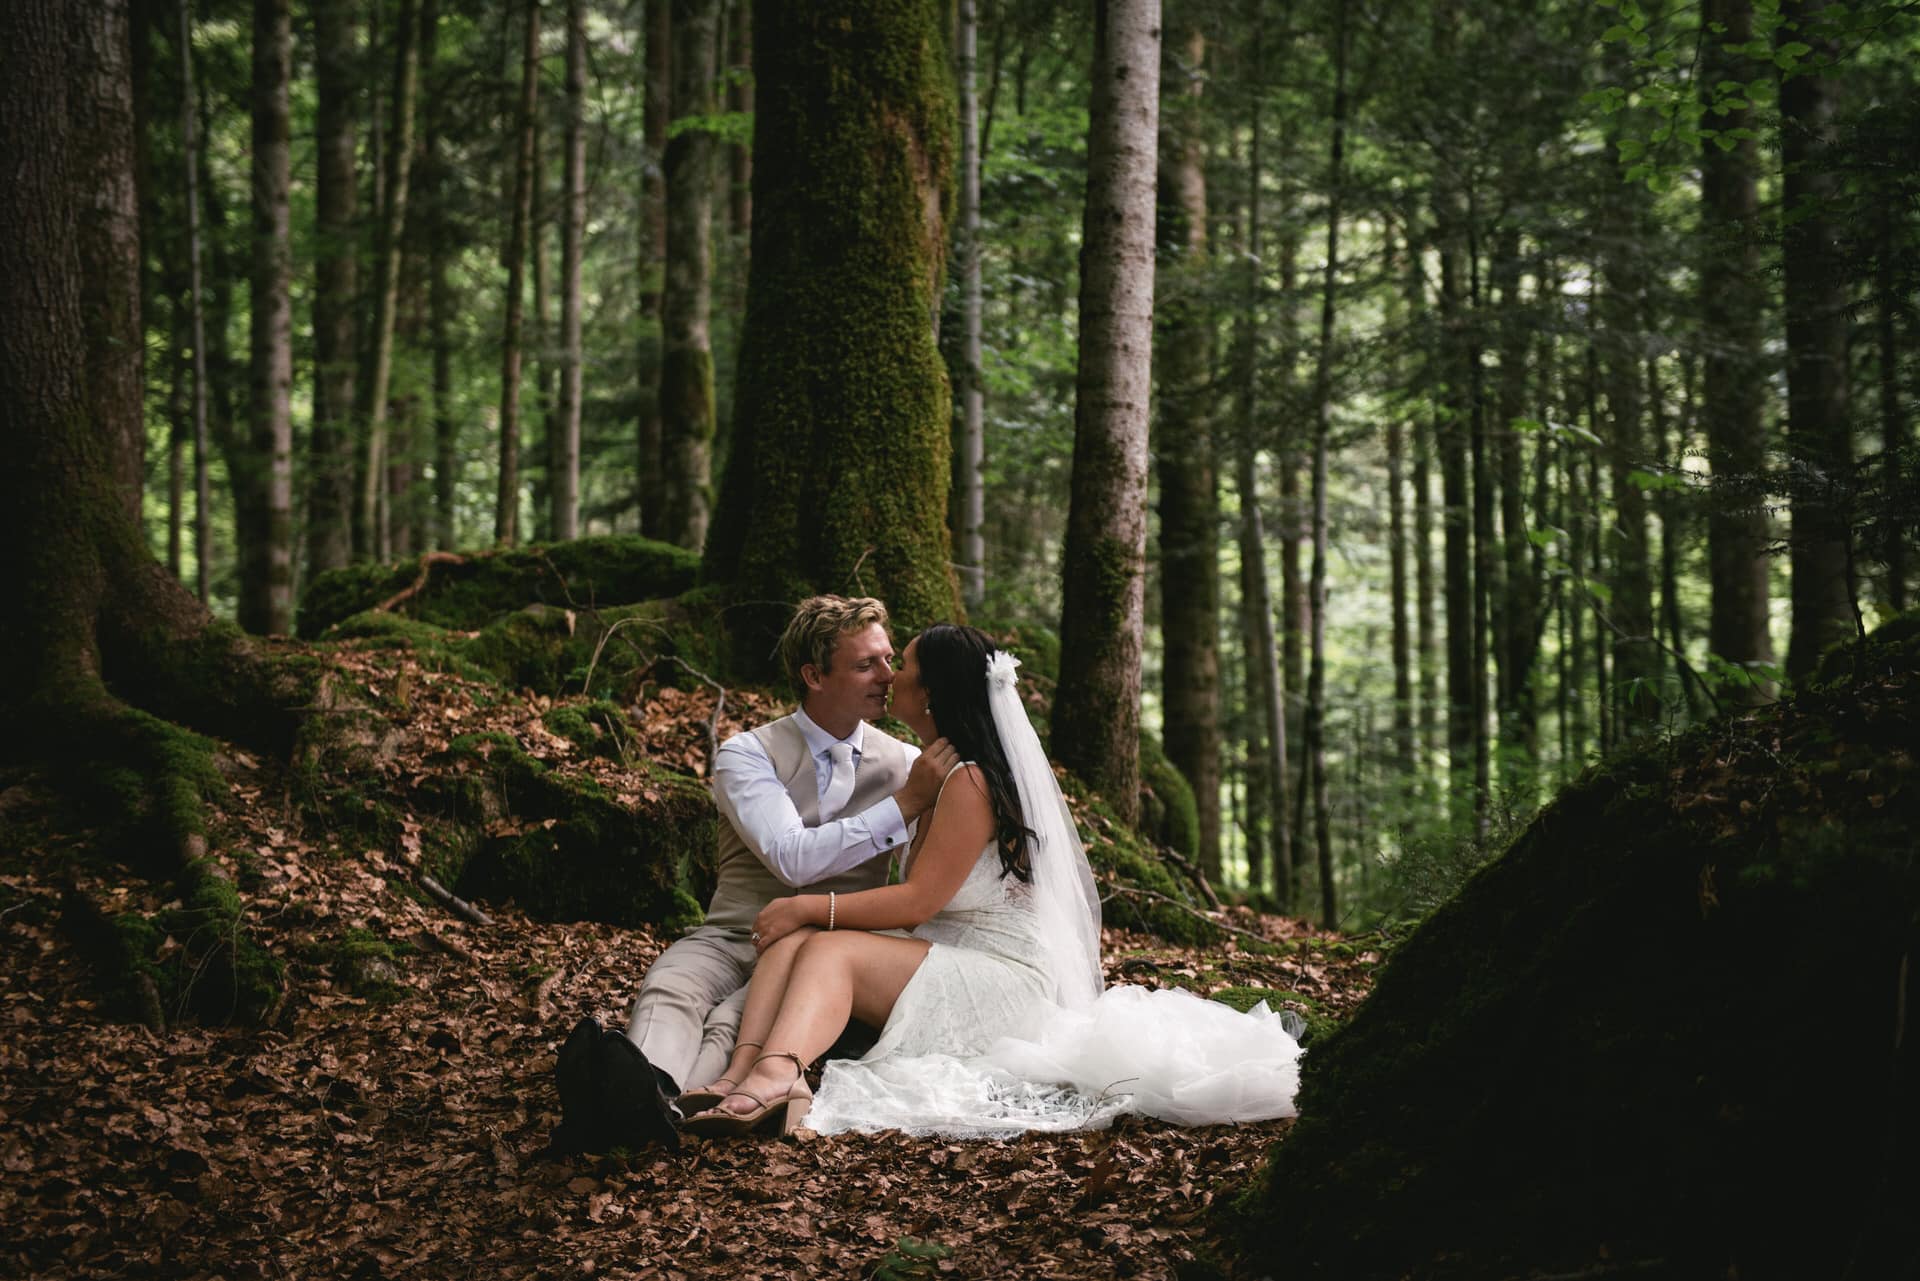 Love's ascent embraced by Swiss charm - Emily & Luke's hiking elopement.